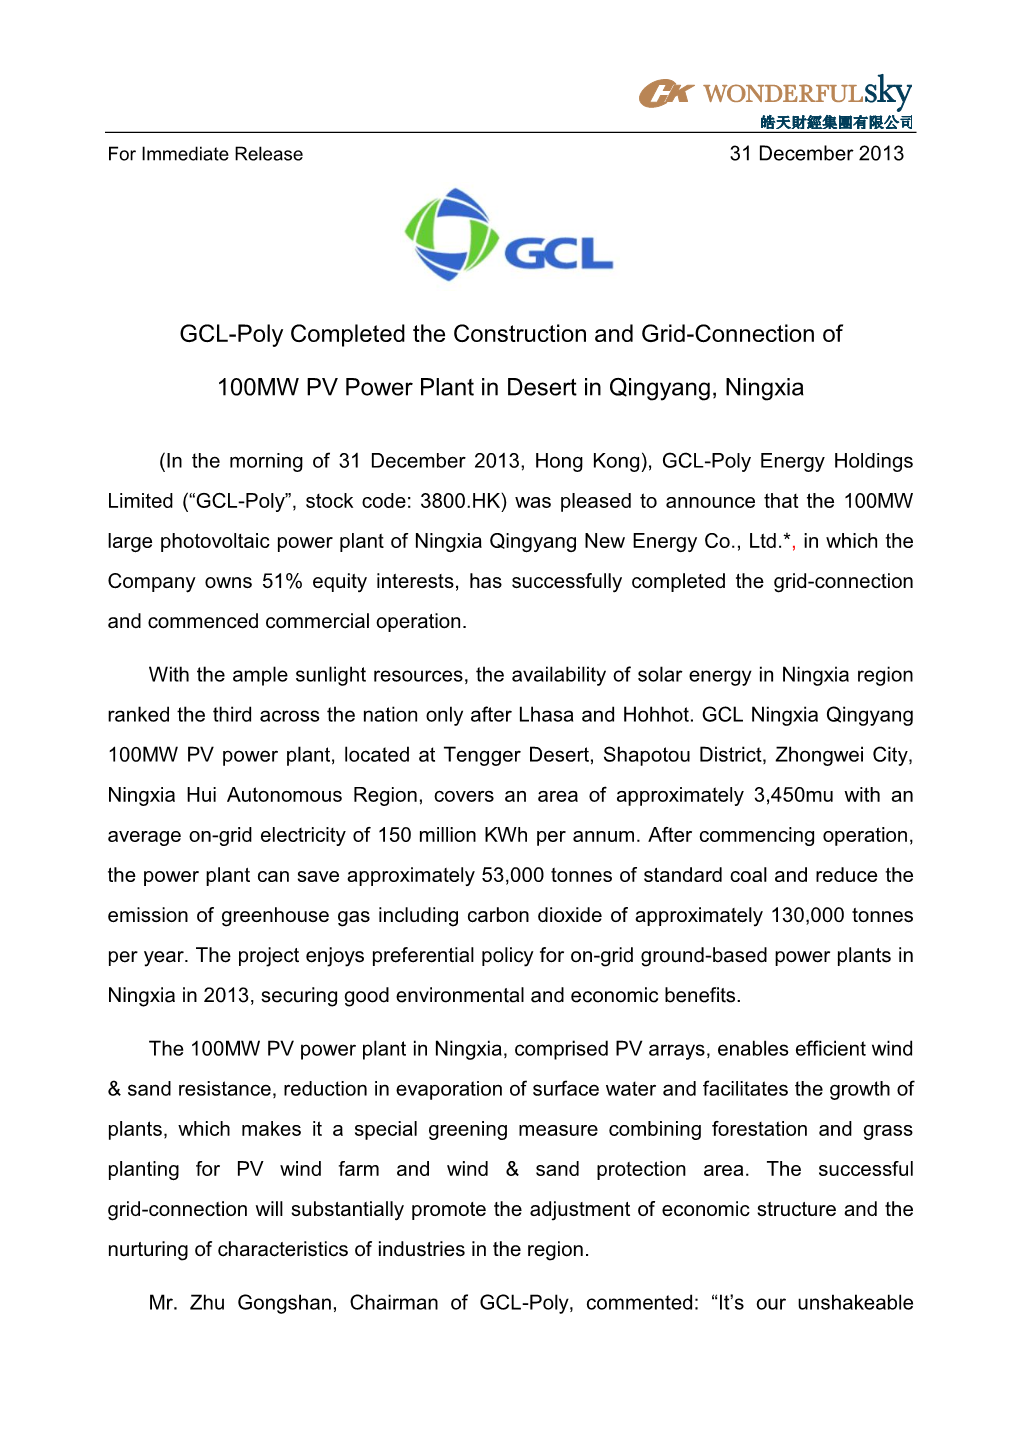 GCL-Poly Completed the Construction and Grid-Connection of 100MW PV